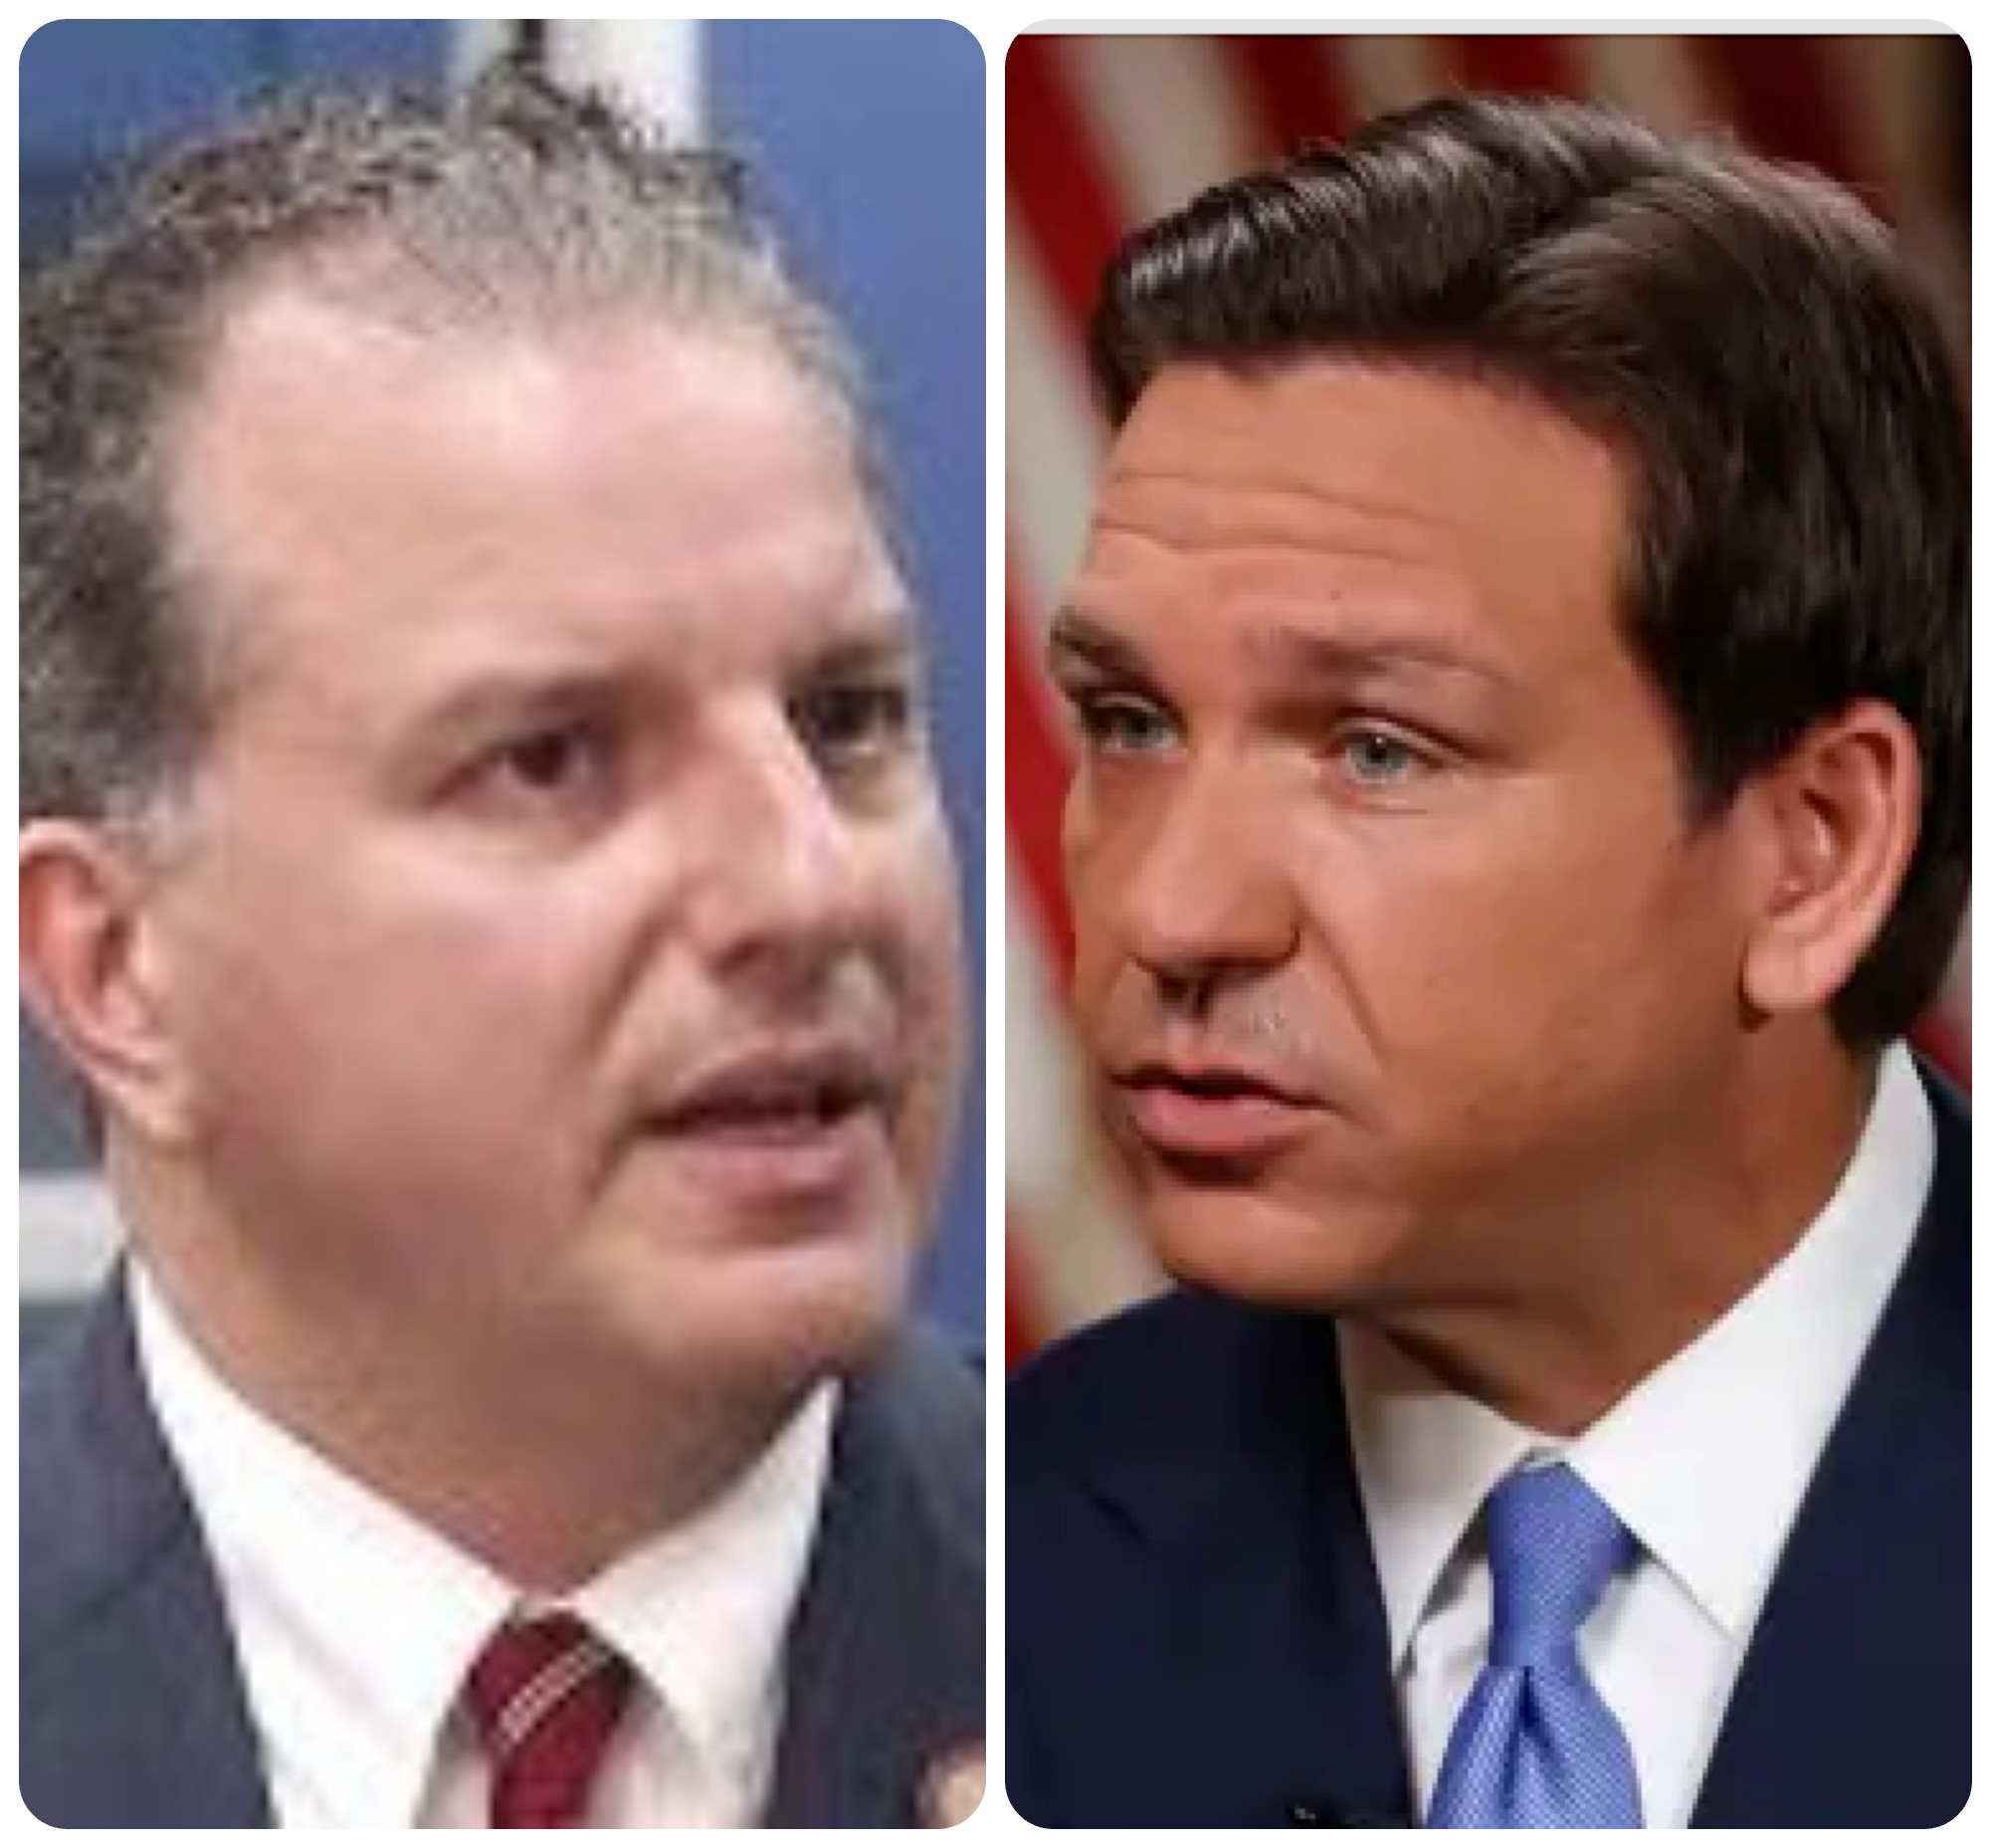 The case that won’t die: DeSantis joins Patronis in boosting fortunes of big contributor in ‘Tooth Fairy’ case